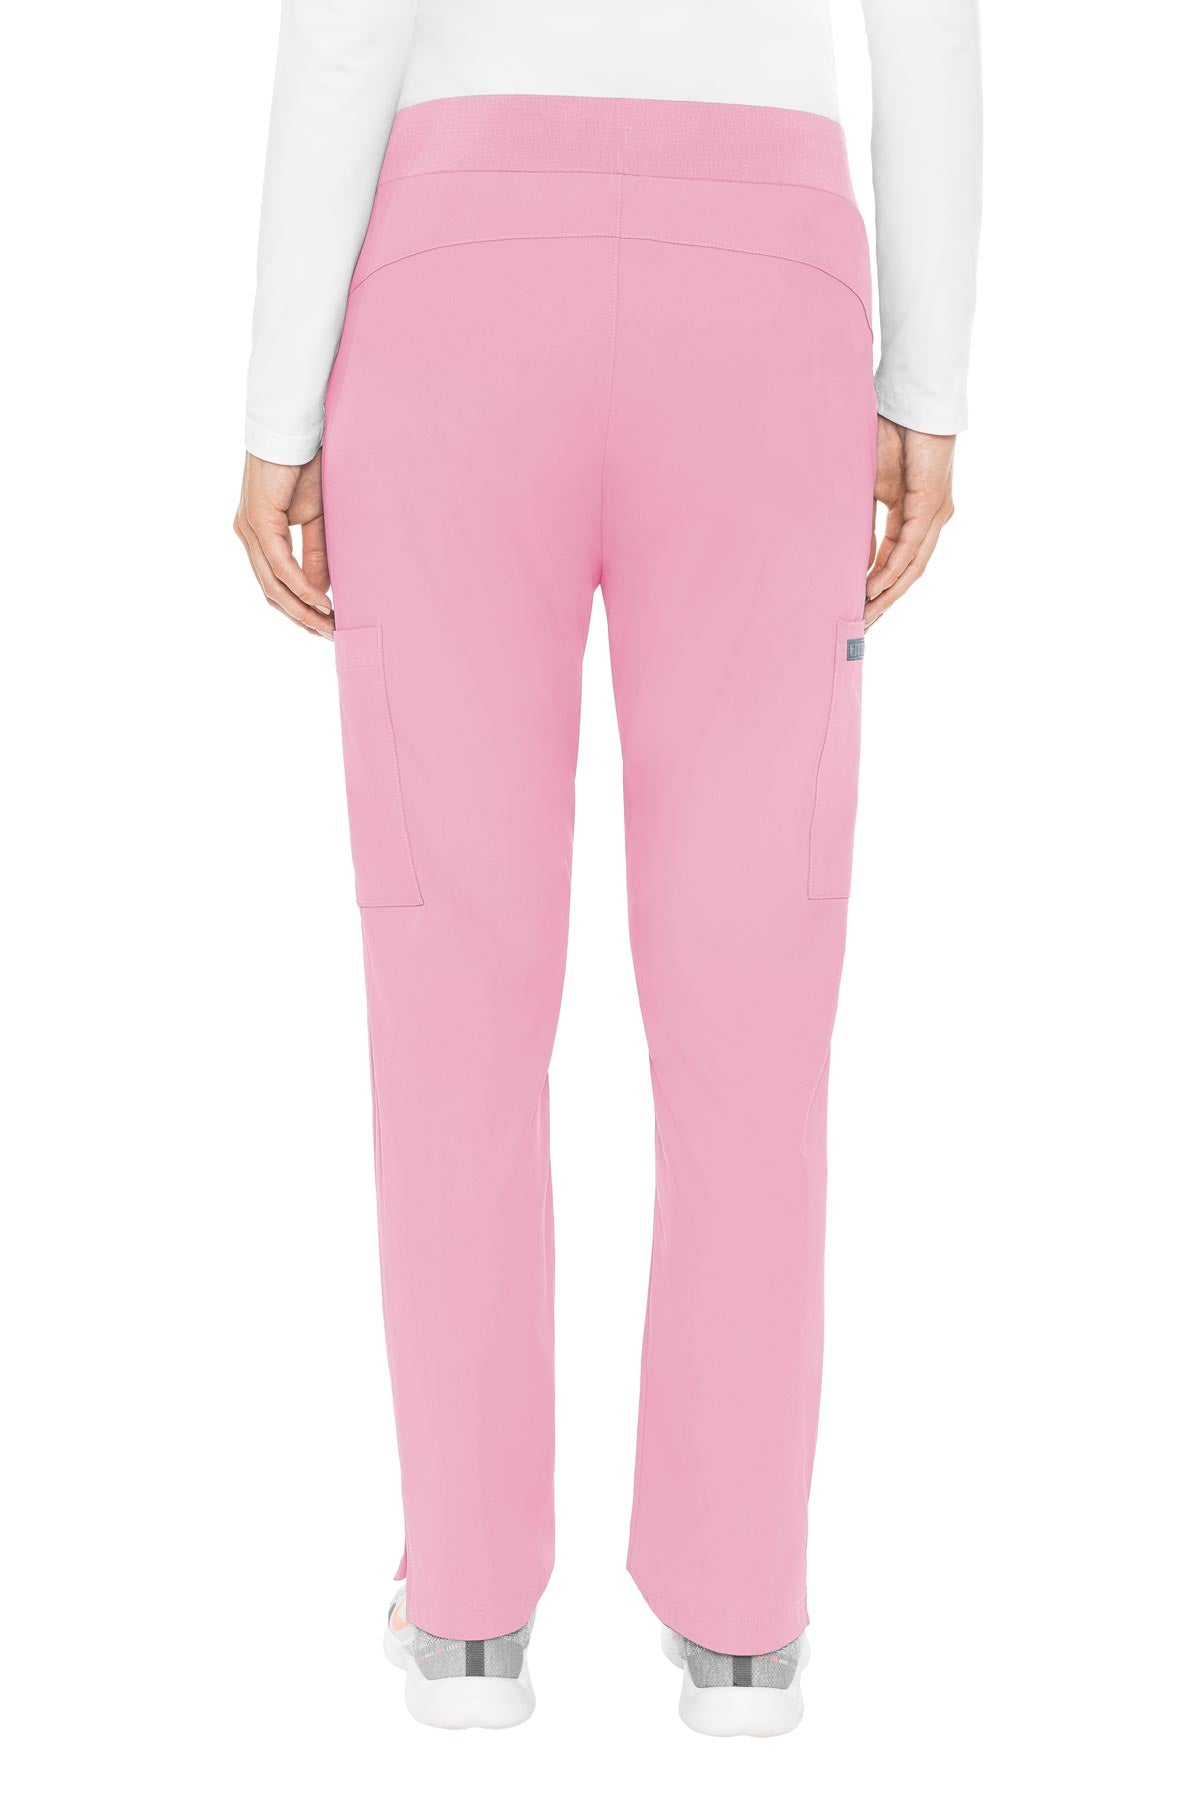 Med Couture Peaches Scoop Pocket Pant Petite Length (XS-XL)